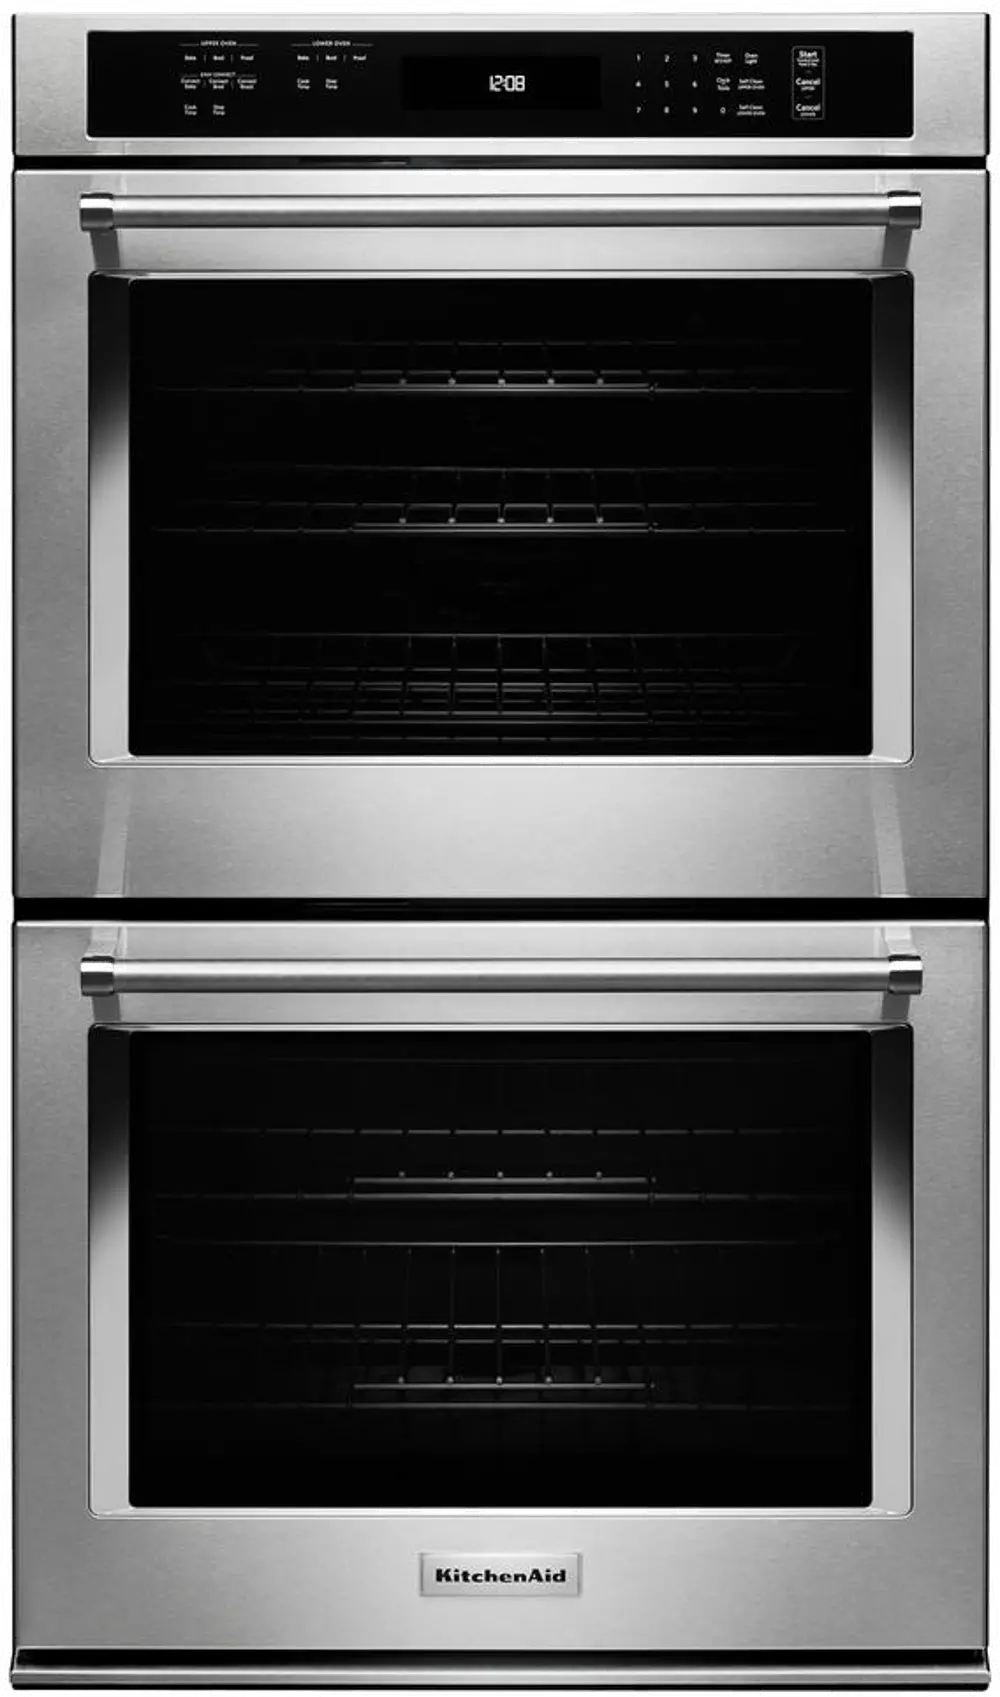 KODE300ESS KitchenAid 30 Inch Double Wall Oven - 10 cu. ft. Stainless Steel-1